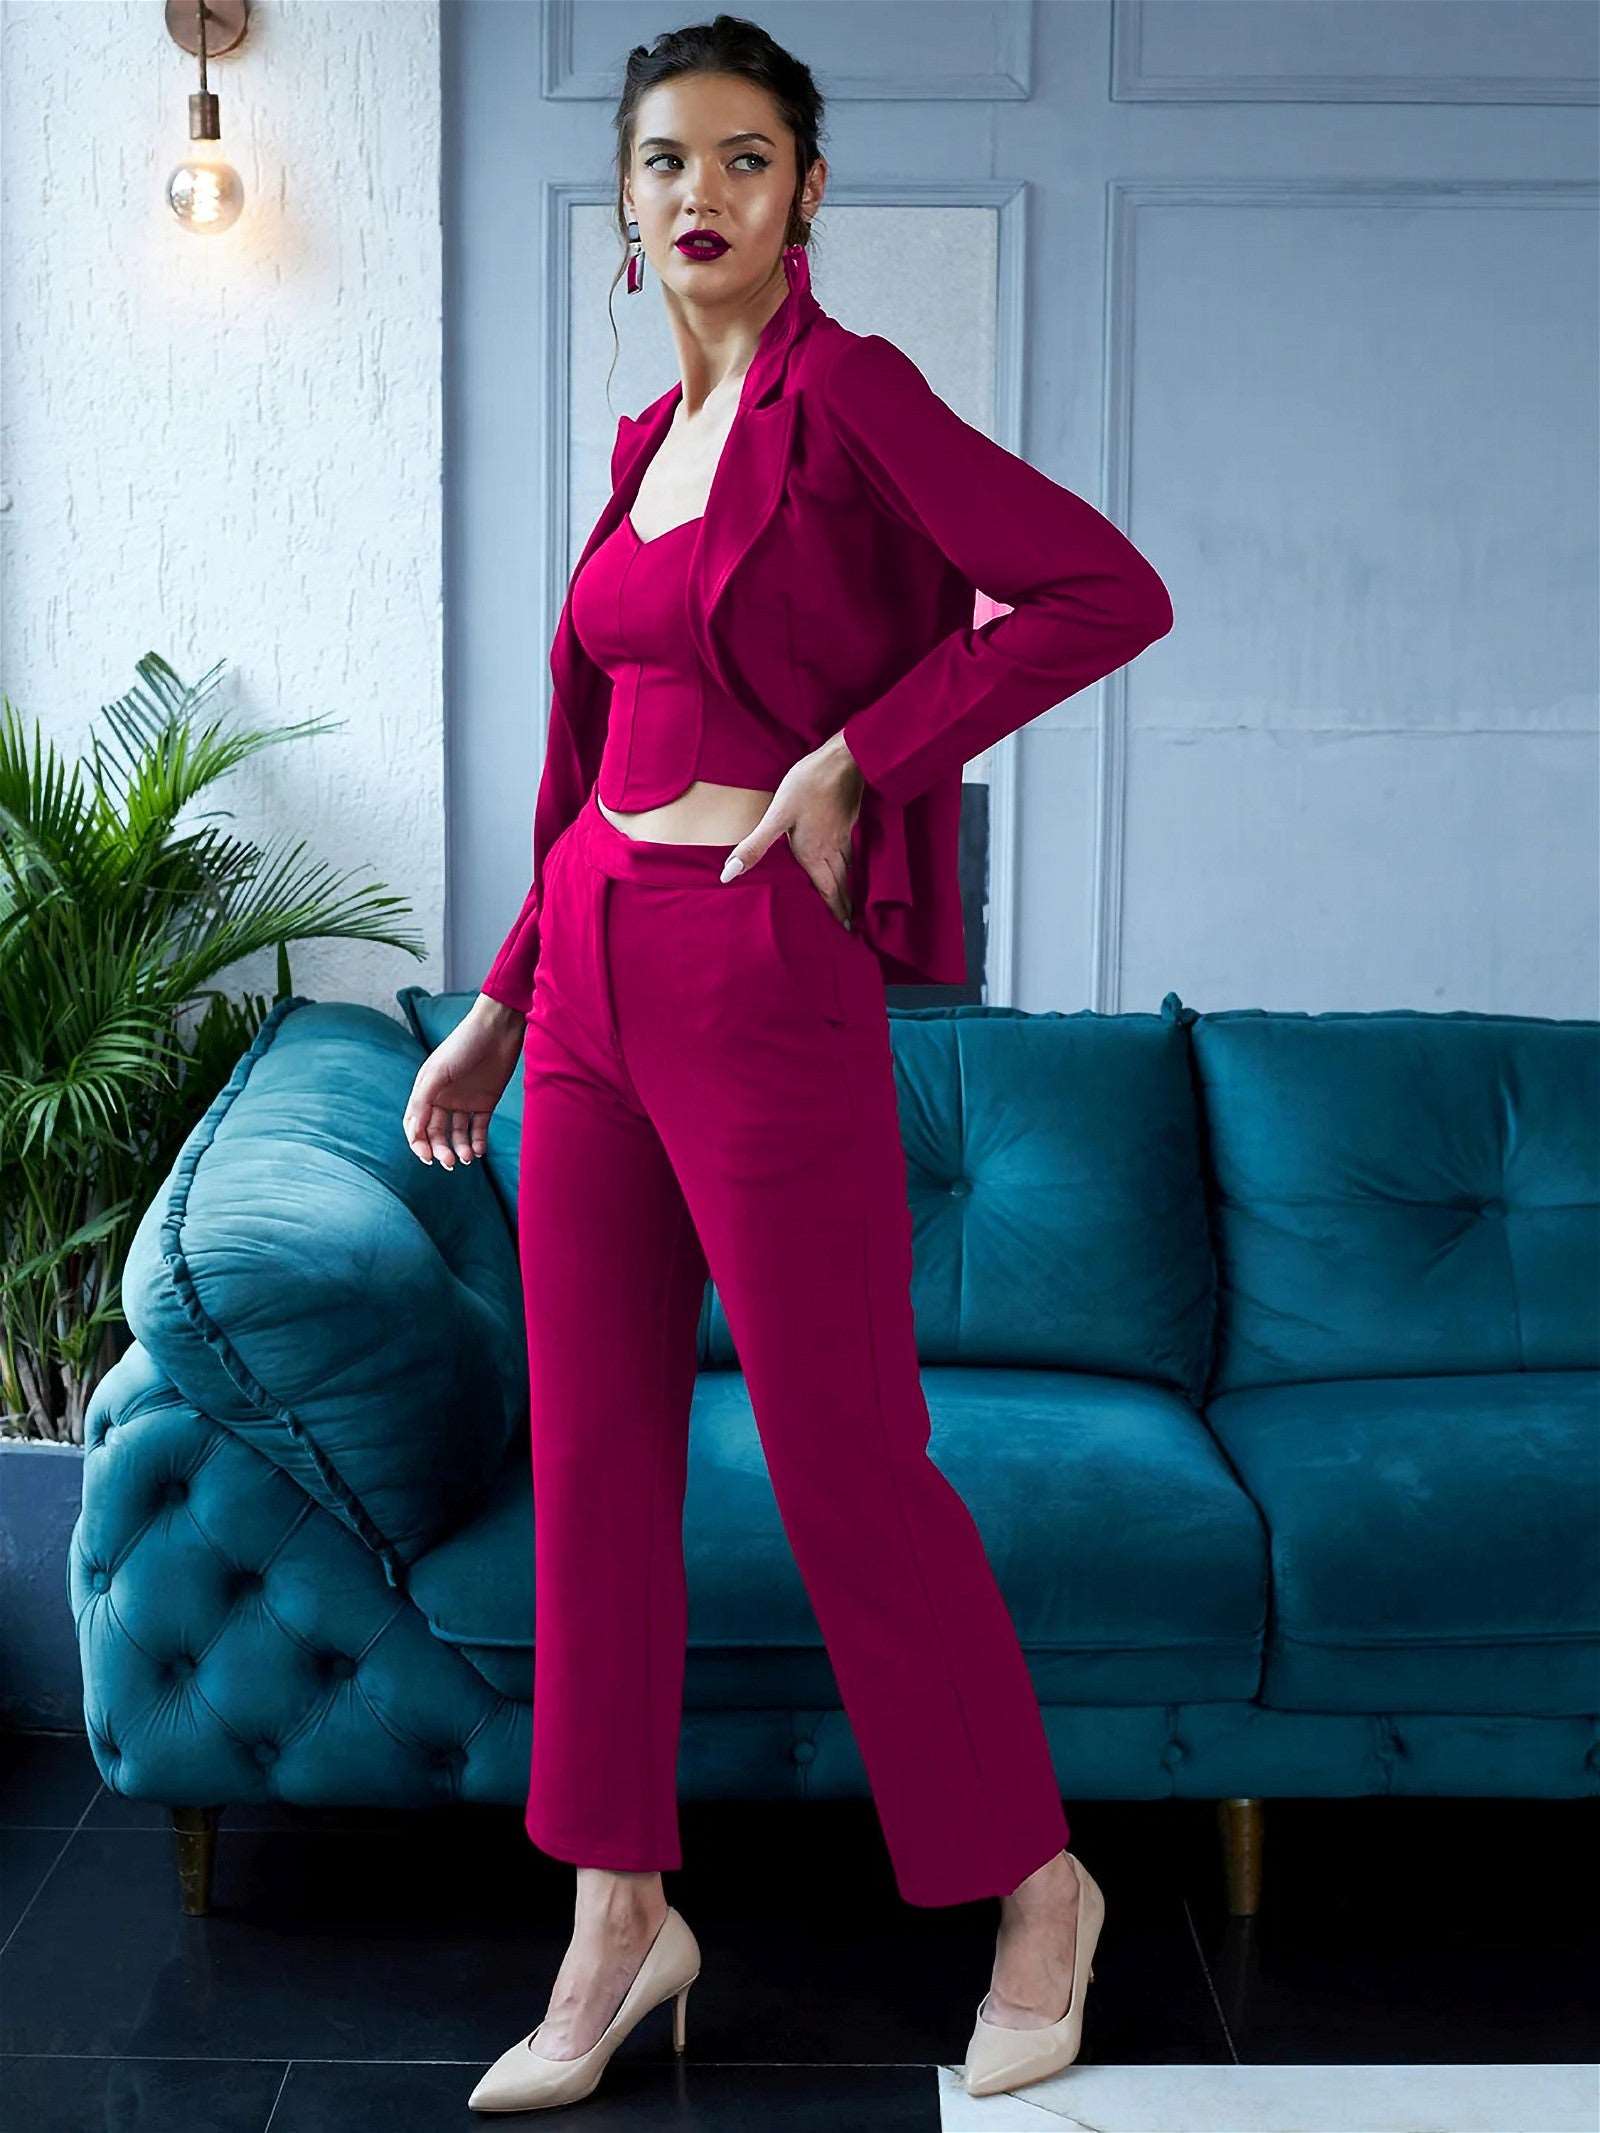 The model in the image is wearing EnVogue Chic - Hot Pink Blazer Co ord from Alice Milan. Crafted with the finest materials and impeccable attention to detail, the Formal Suit looks premium, trendy, luxurious and offers unparalleled comfort. It’s a perfect clothing option for loungewear, resort wear, party wear or for an airport look. The woman in the image looks happy, and confident with her style statement putting a happy smile on her face.